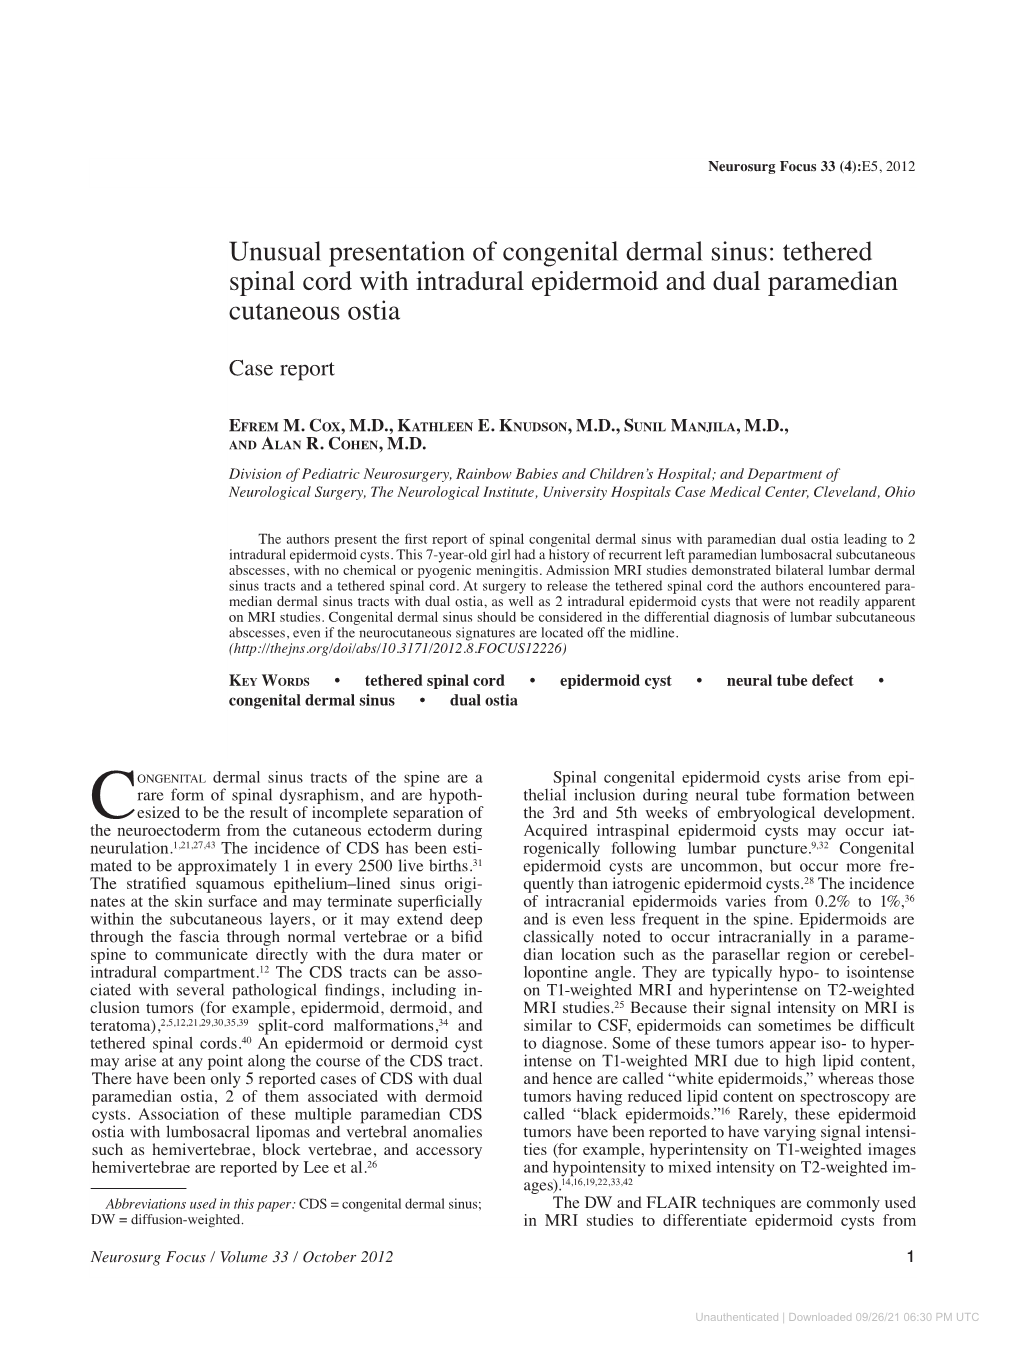 Unusual Presentation of Congenital Dermal Sinus: Tethered Spinal Cord with Intradural Epidermoid and Dual Paramedian Cutaneous Ostia